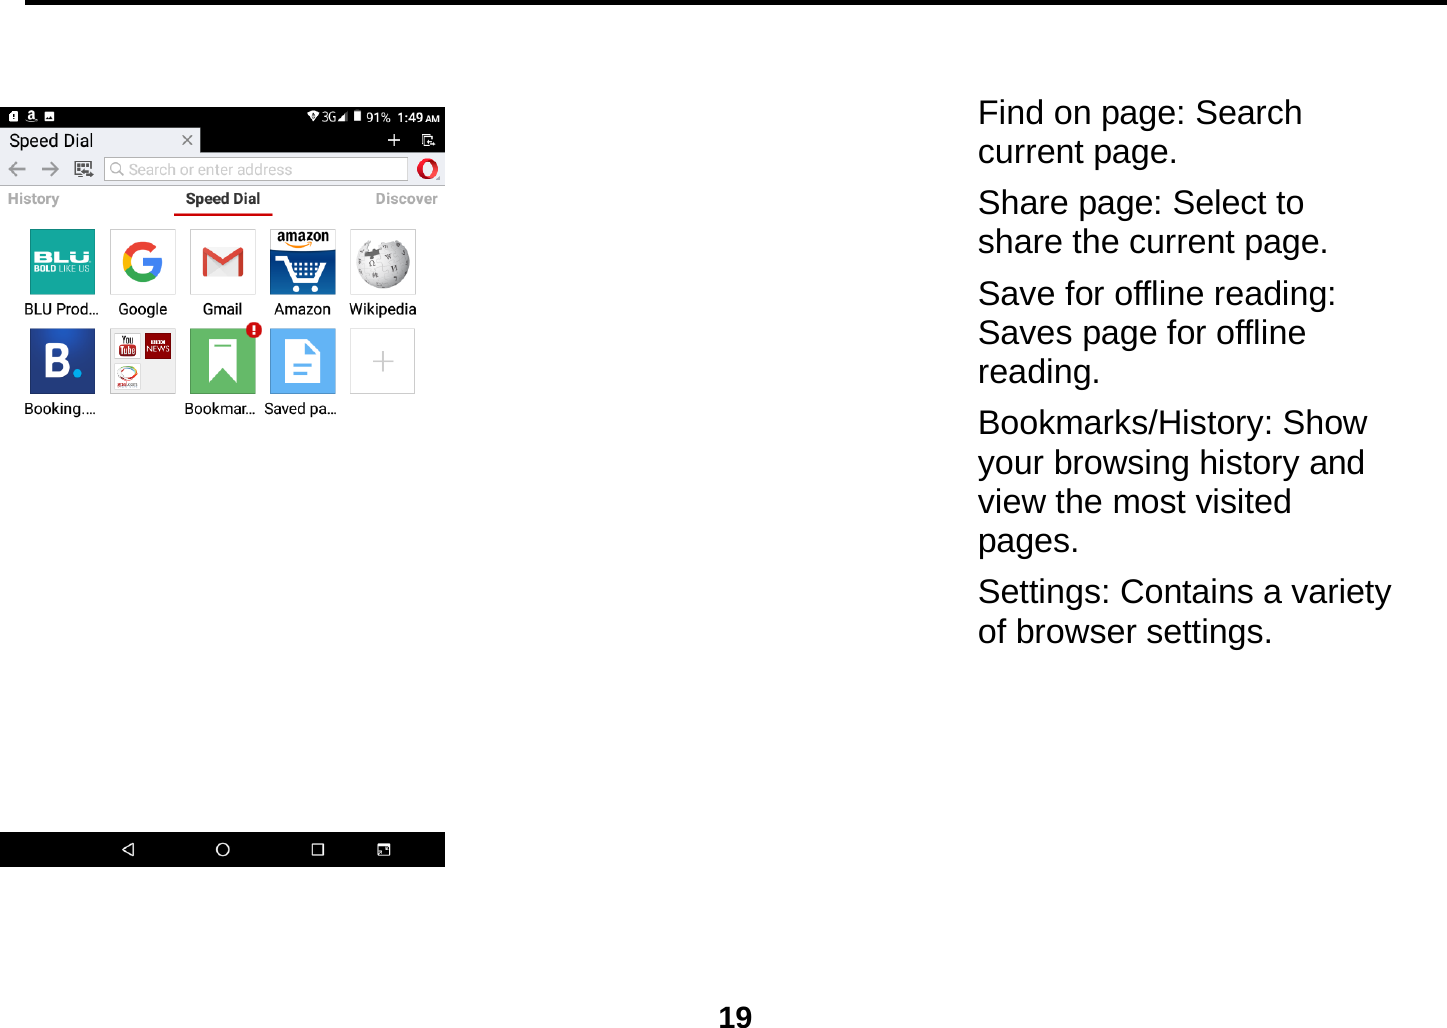  19  Find on page: Search current page. Share page: Select to share the current page. Save for offline reading: Saves page for offline reading. Bookmarks/History: Show your browsing history and view the most visited pages. Settings: Contains a variety of browser settings.    